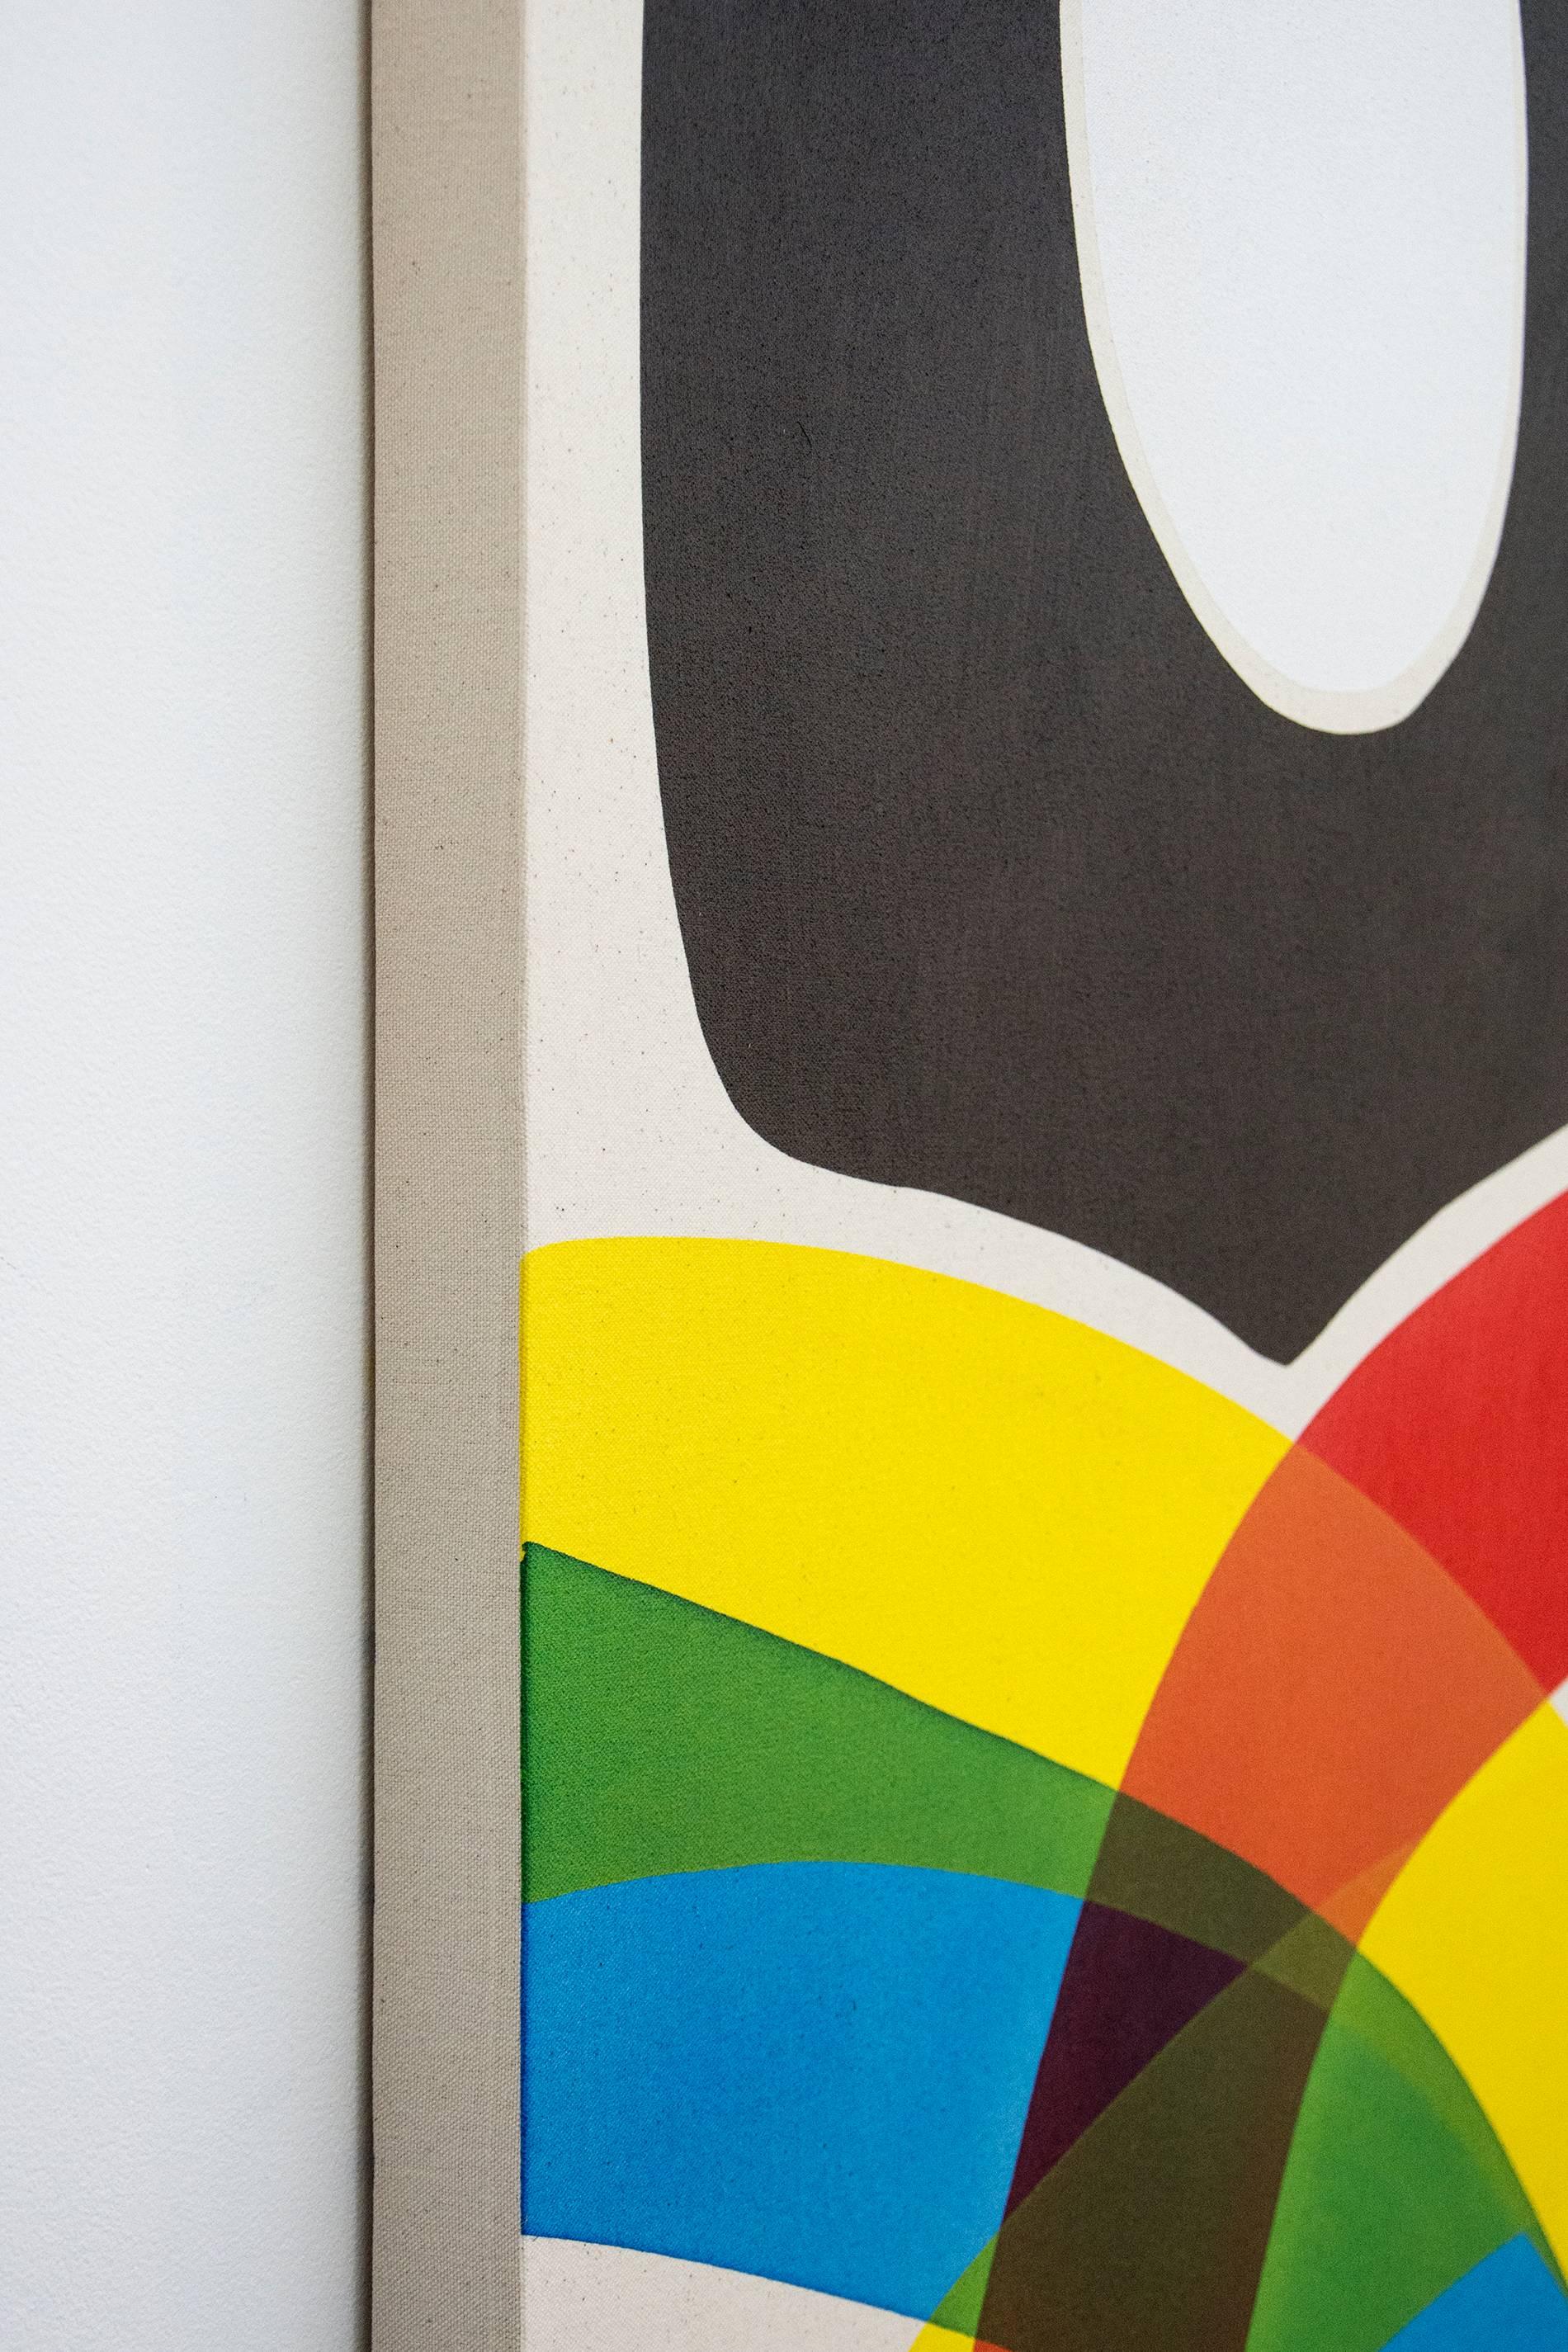 Aron Hill enjoys playing with bold colour and simple form. This abstract composition by the Calgary artist features a white oval ringed in black above a rainbow of colour—arched bands of red, yellow and blue that become green, orange and purple when